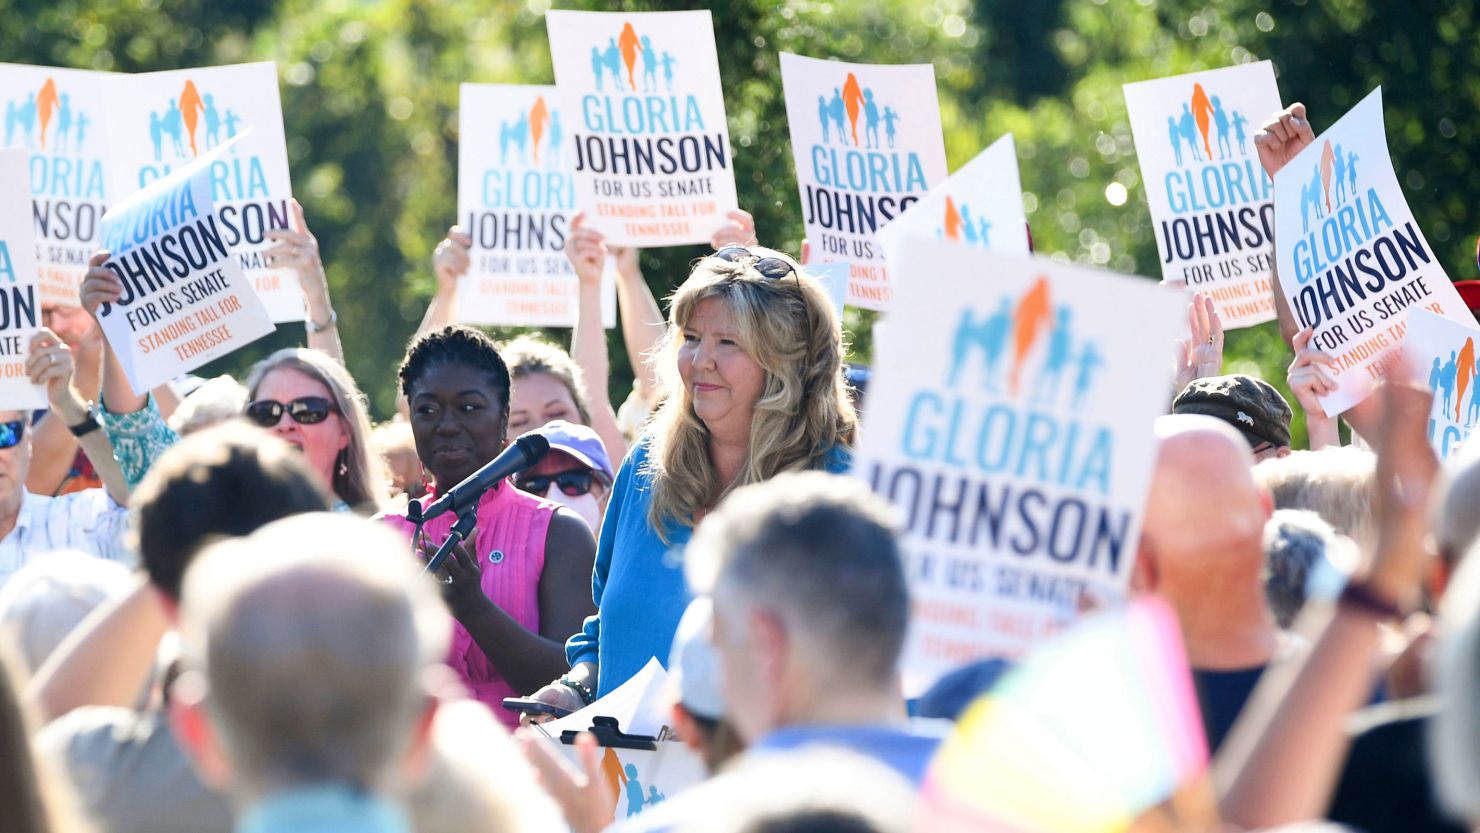 Supporters gather around Tennessee state representative Gloria Johnson as she announces her run for US Senate at Savage Gardens in Knoxville, Tennessee, on September 5. 